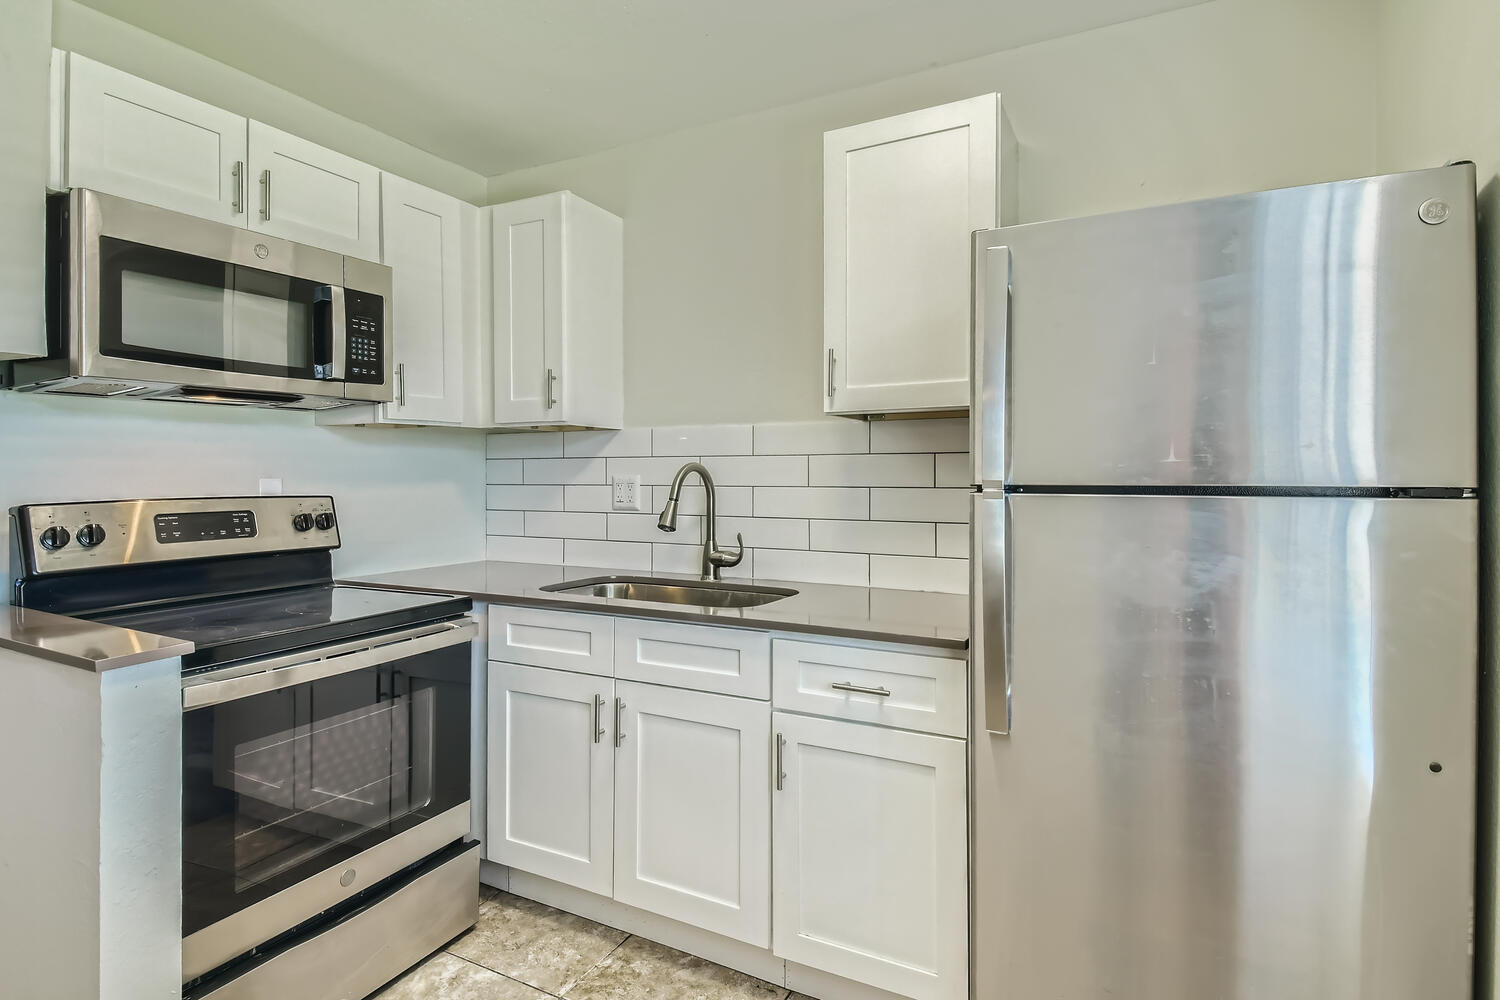 The kitchen with stainless steel appliances and white shaker cabinets at Rise at the Palms.